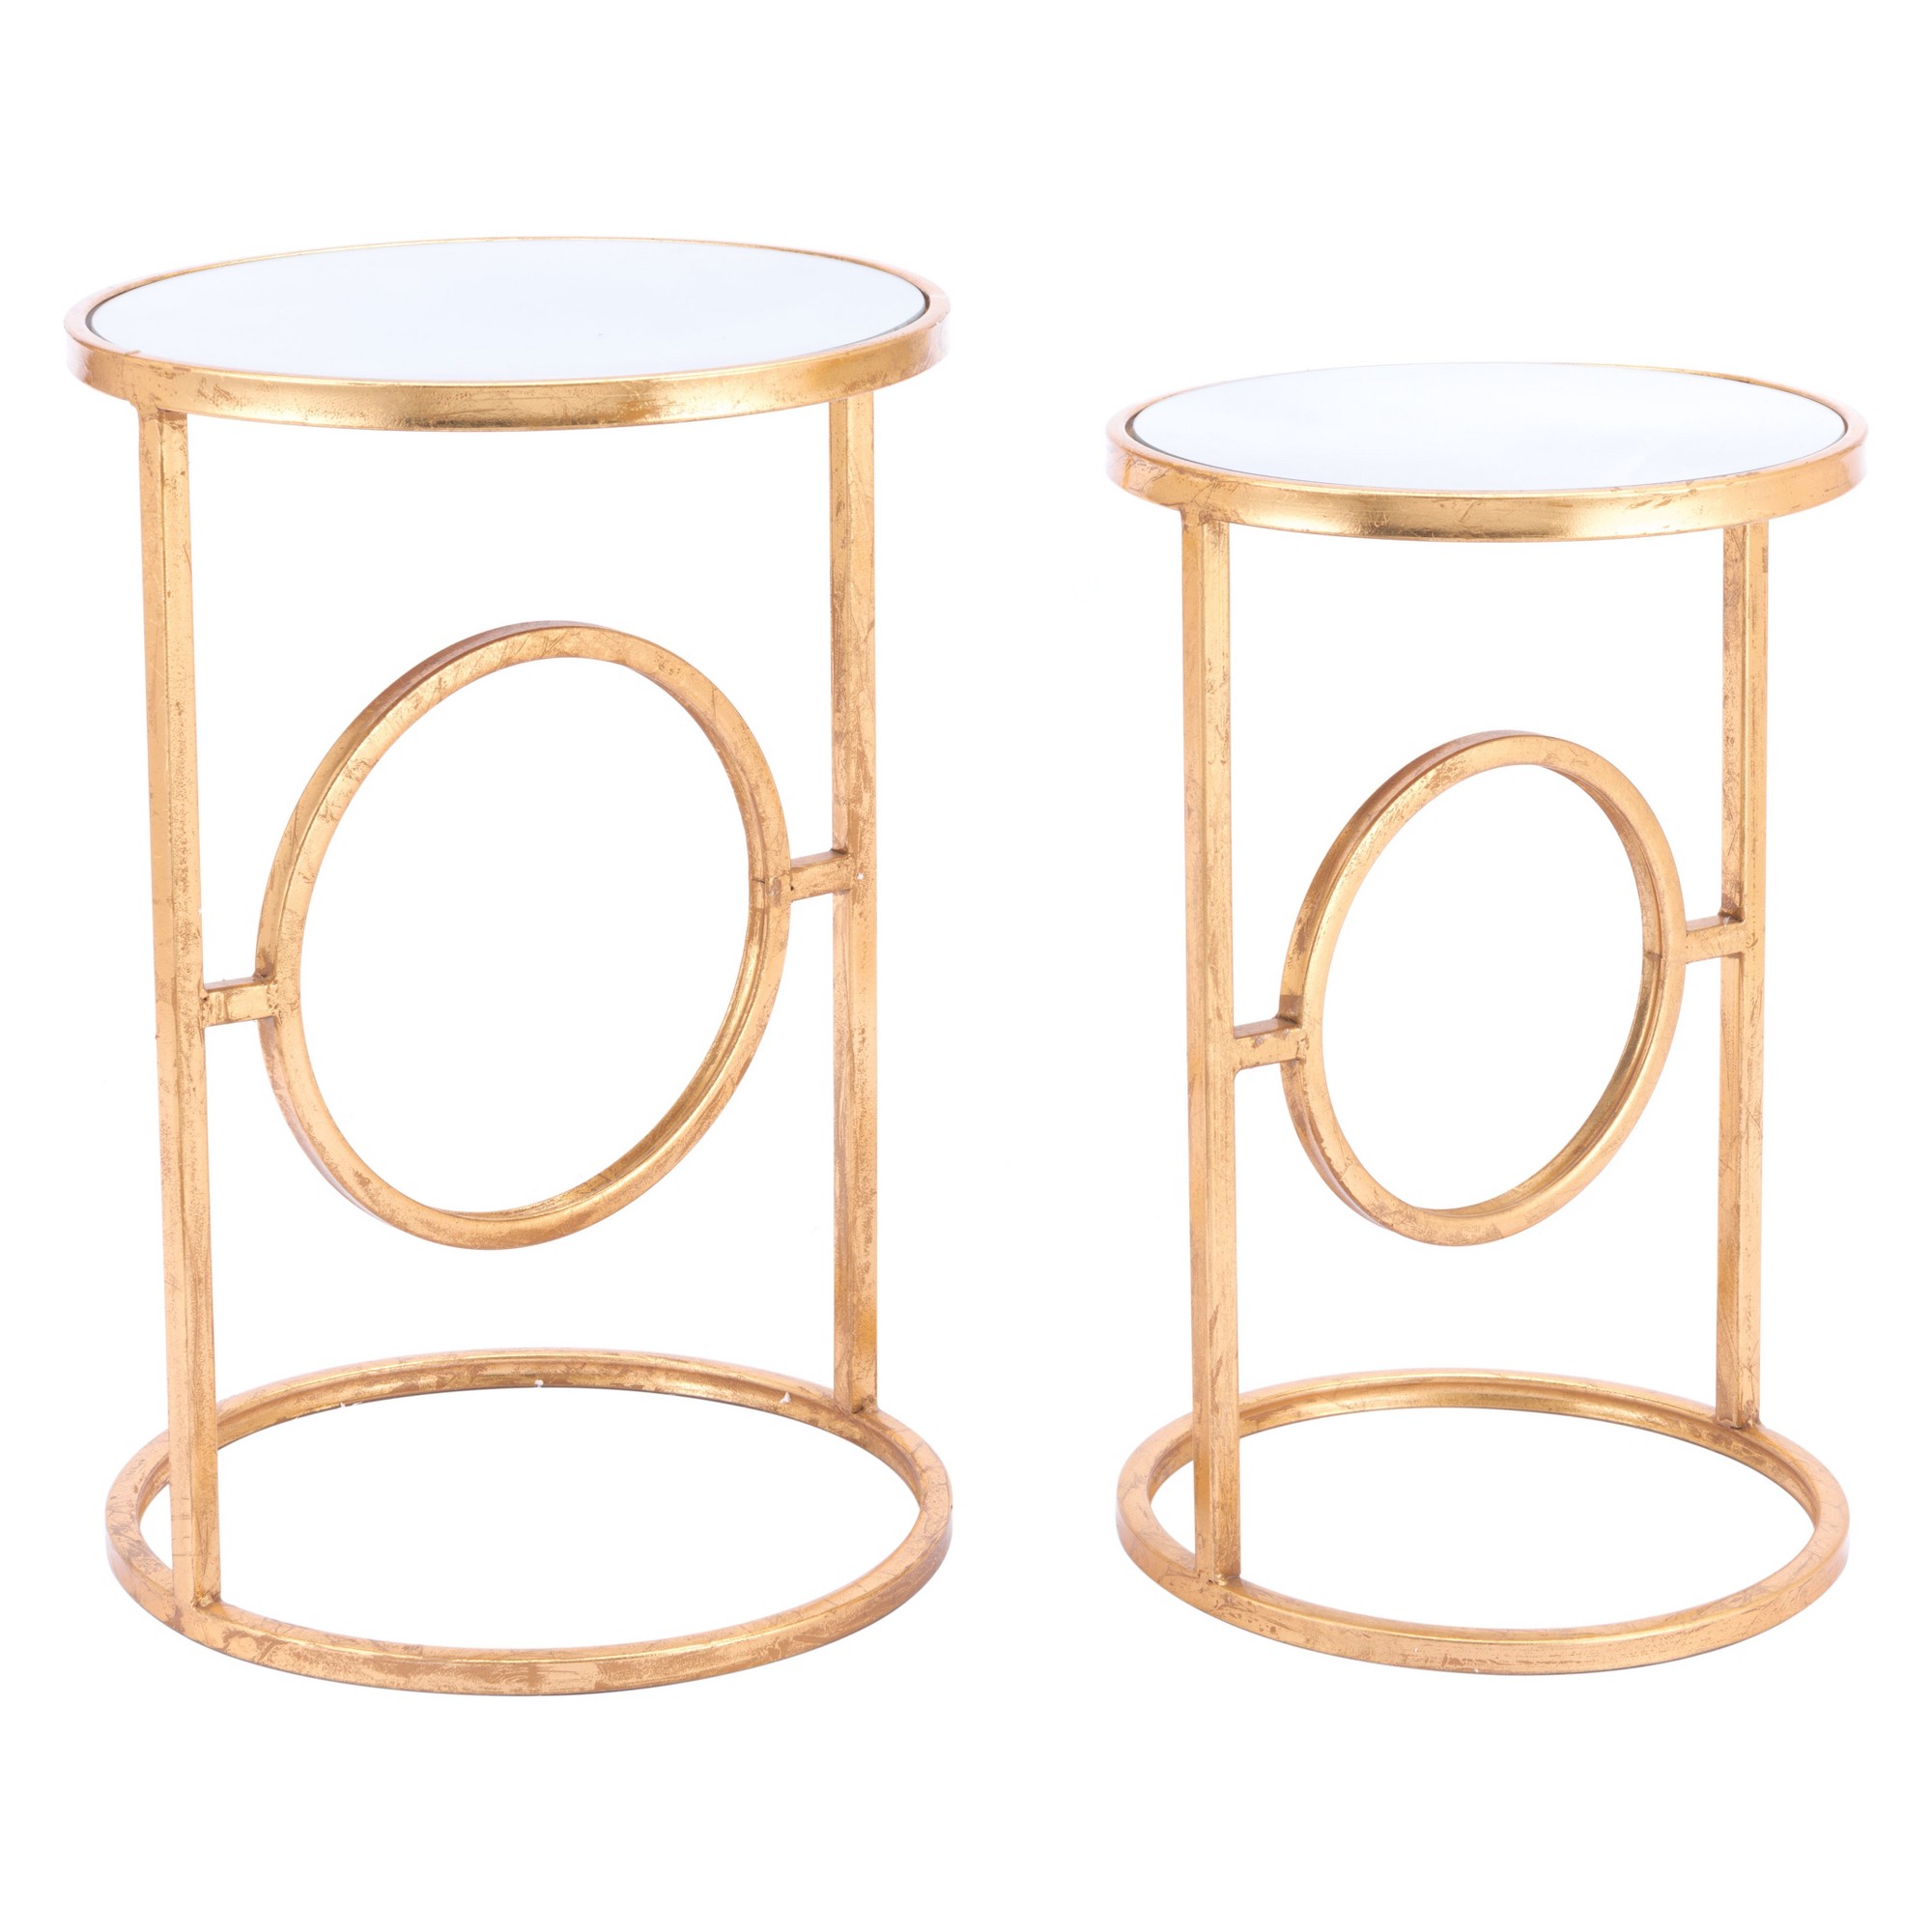 luxe steel mirror accent tables set gold home mirrored table bar for white entrance west elm stools lamp shades small lamps piece nesting and glass console bathroom tubs circular